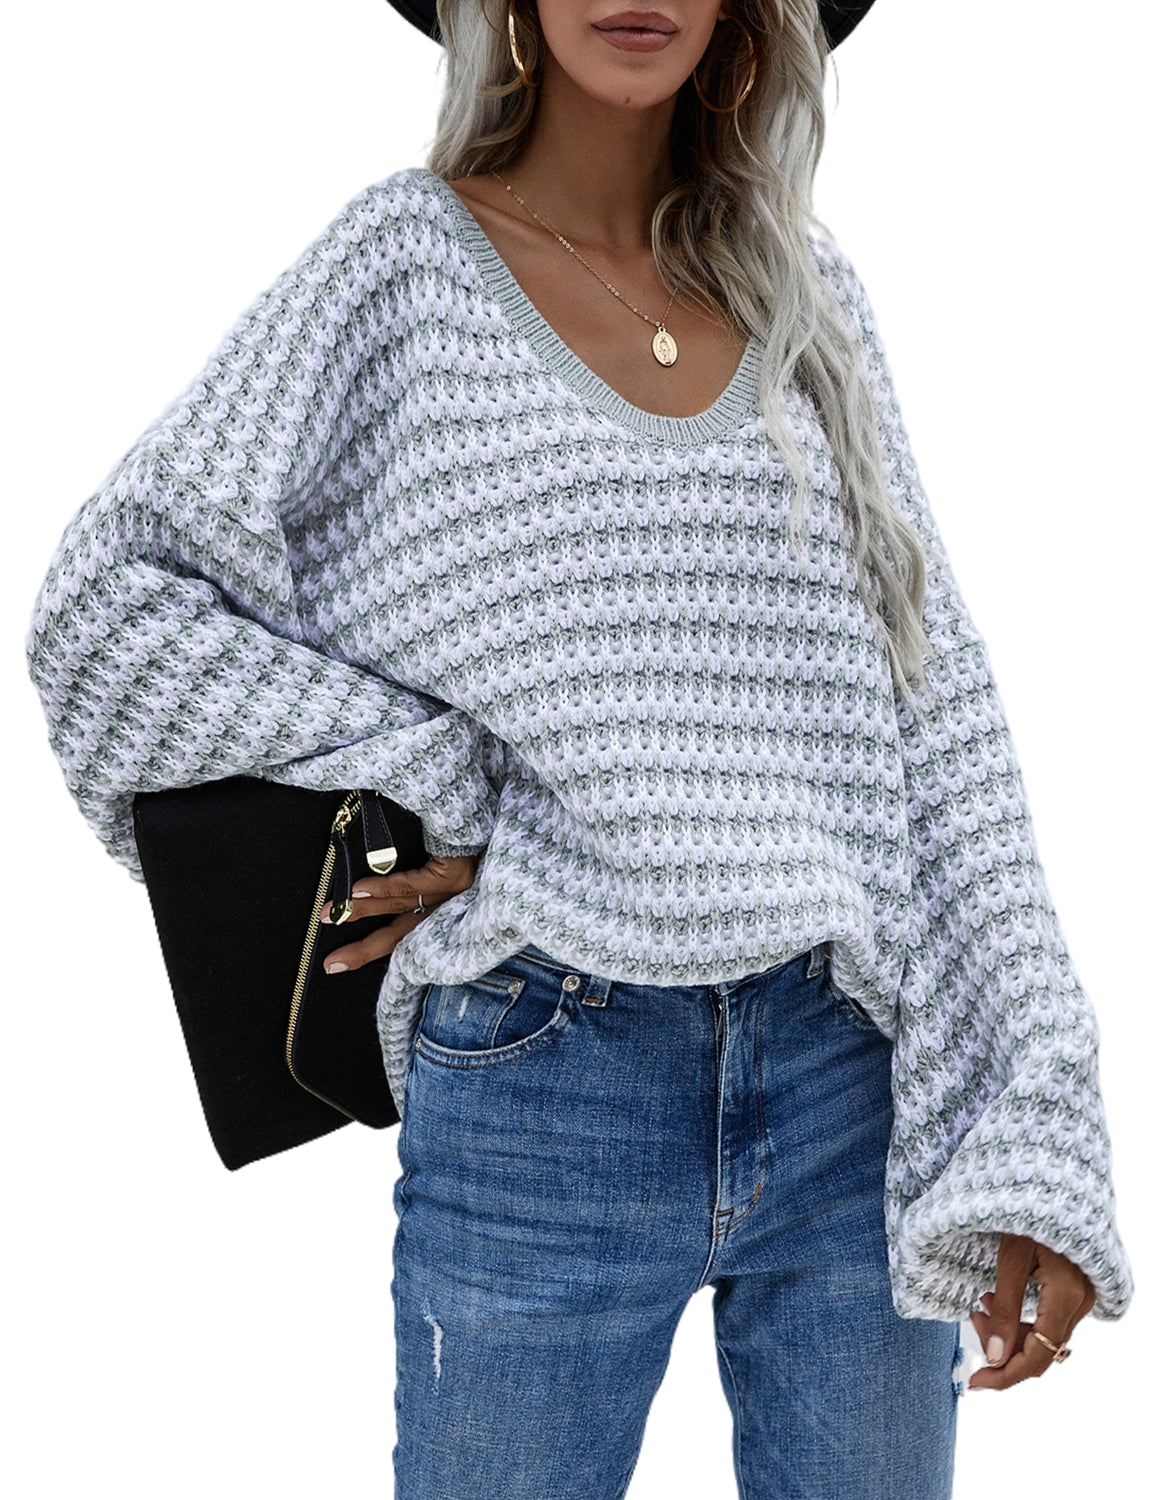 Women's Dropped Shoulder Loose Casual Long Sleeve Pullover Sweater Cozy Top